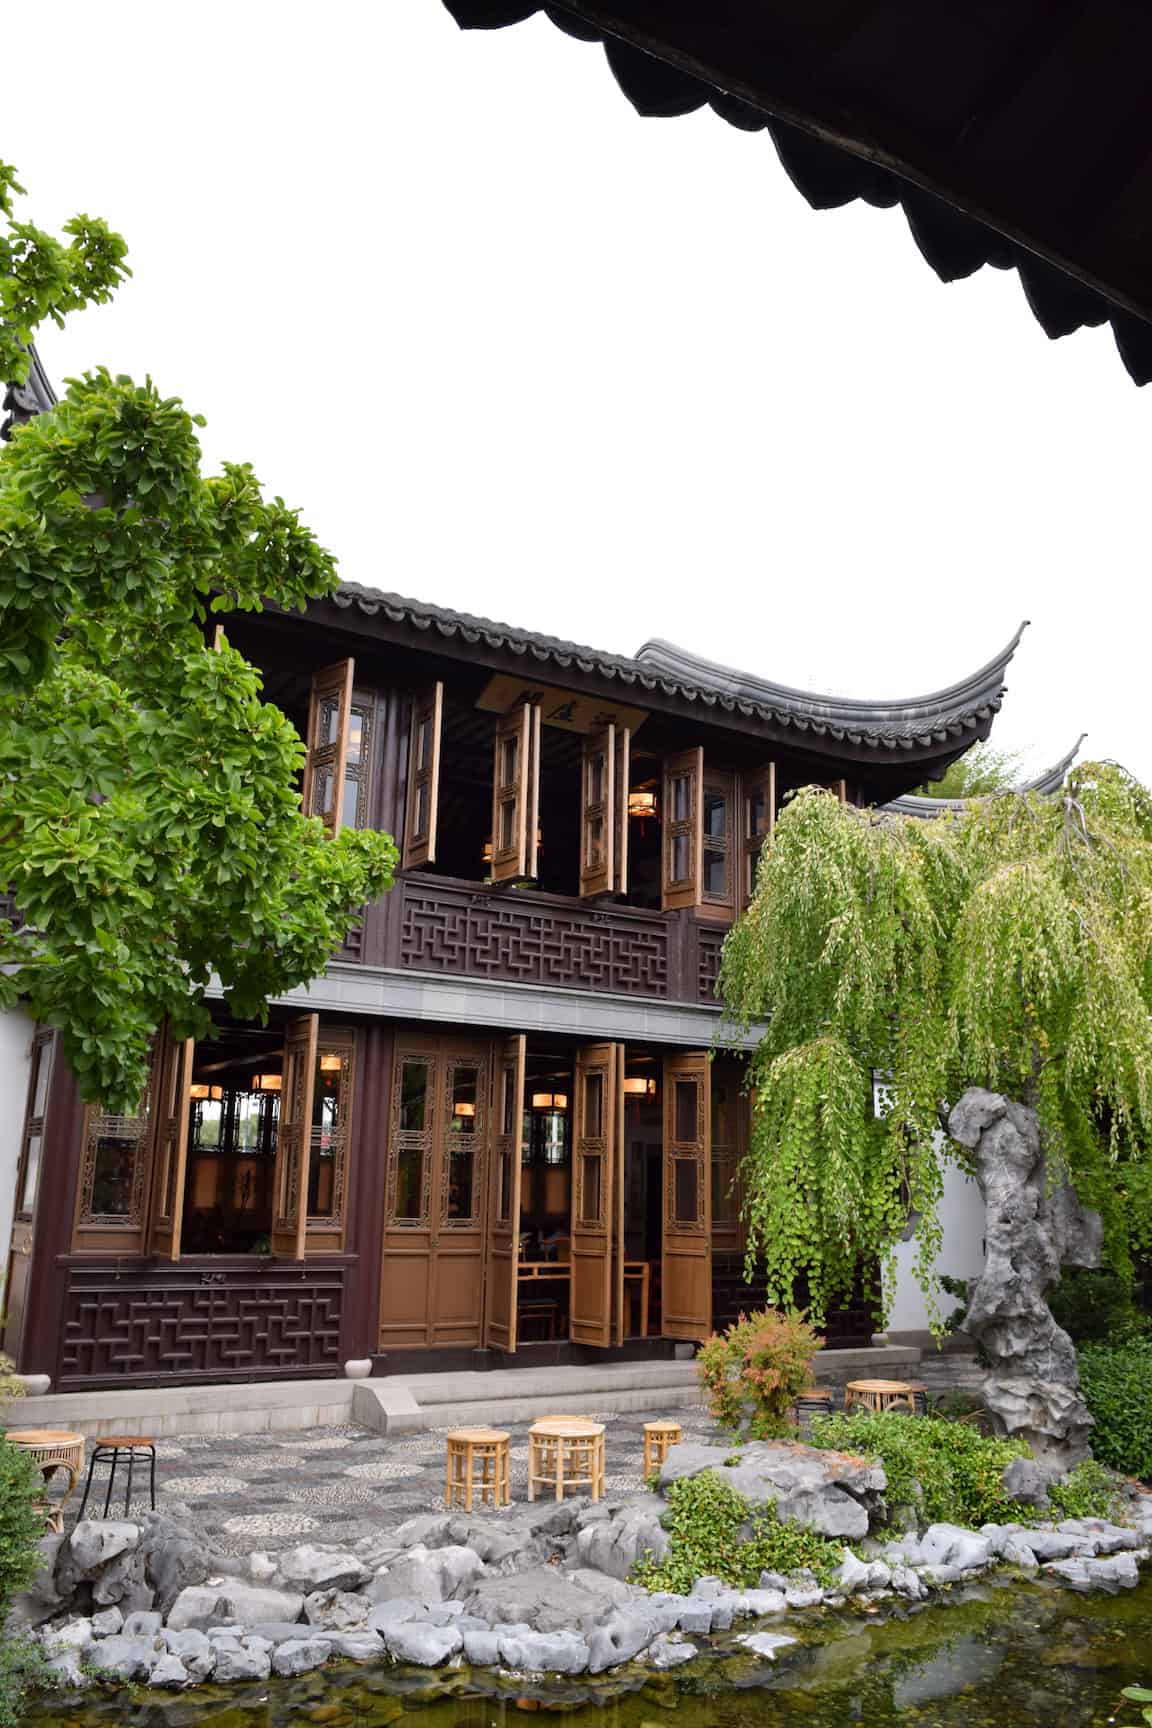 In downtown Portland, the Lan Su Chinese Garden has a teahouse, koi ponds and more for a relaxing refuge. Add this hidden gem to your Portland itinerary when you travel to Oregon. To & Fro Fam